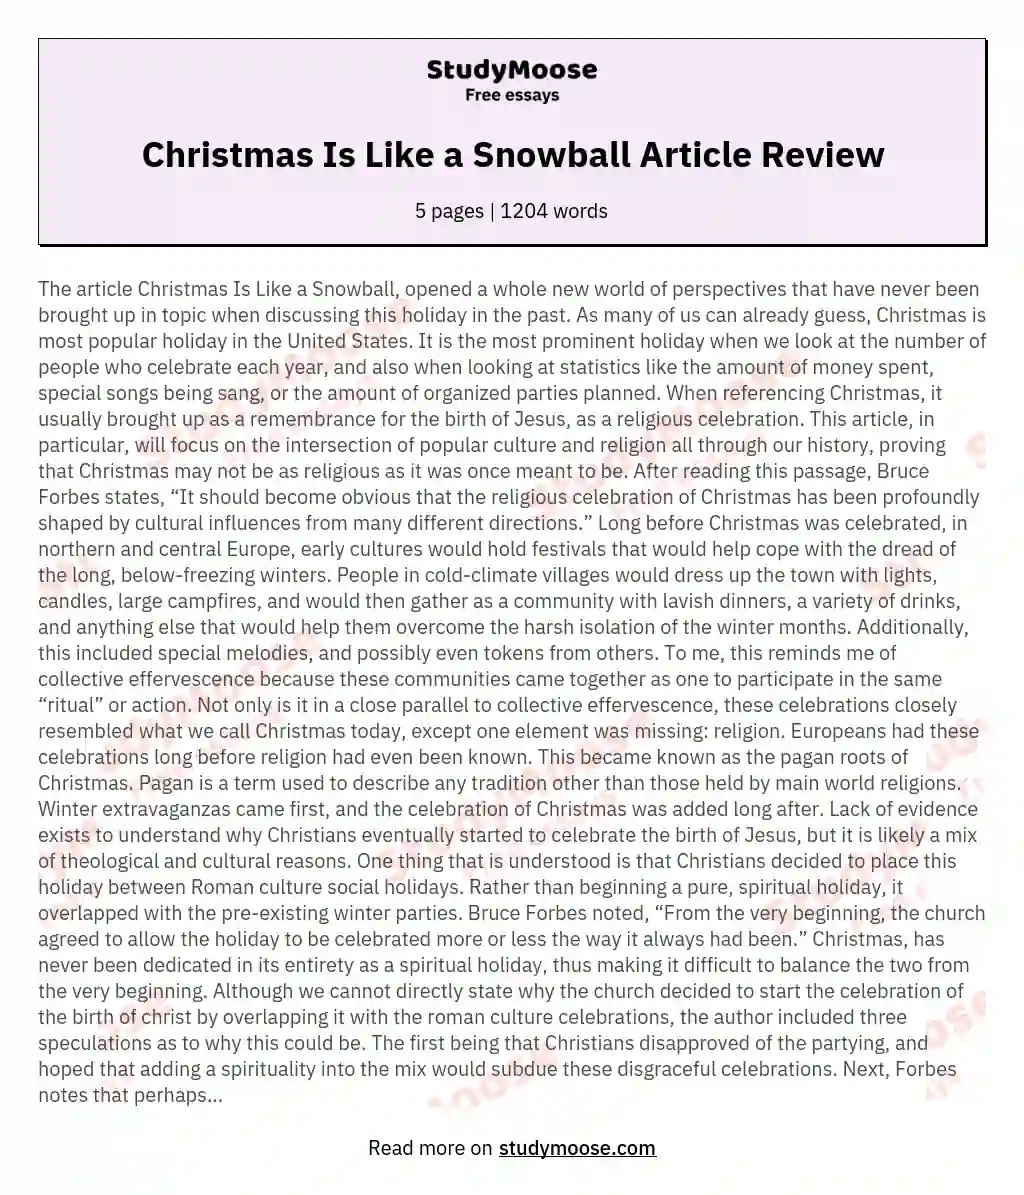 Christmas Is Like a Snowball Article Review essay